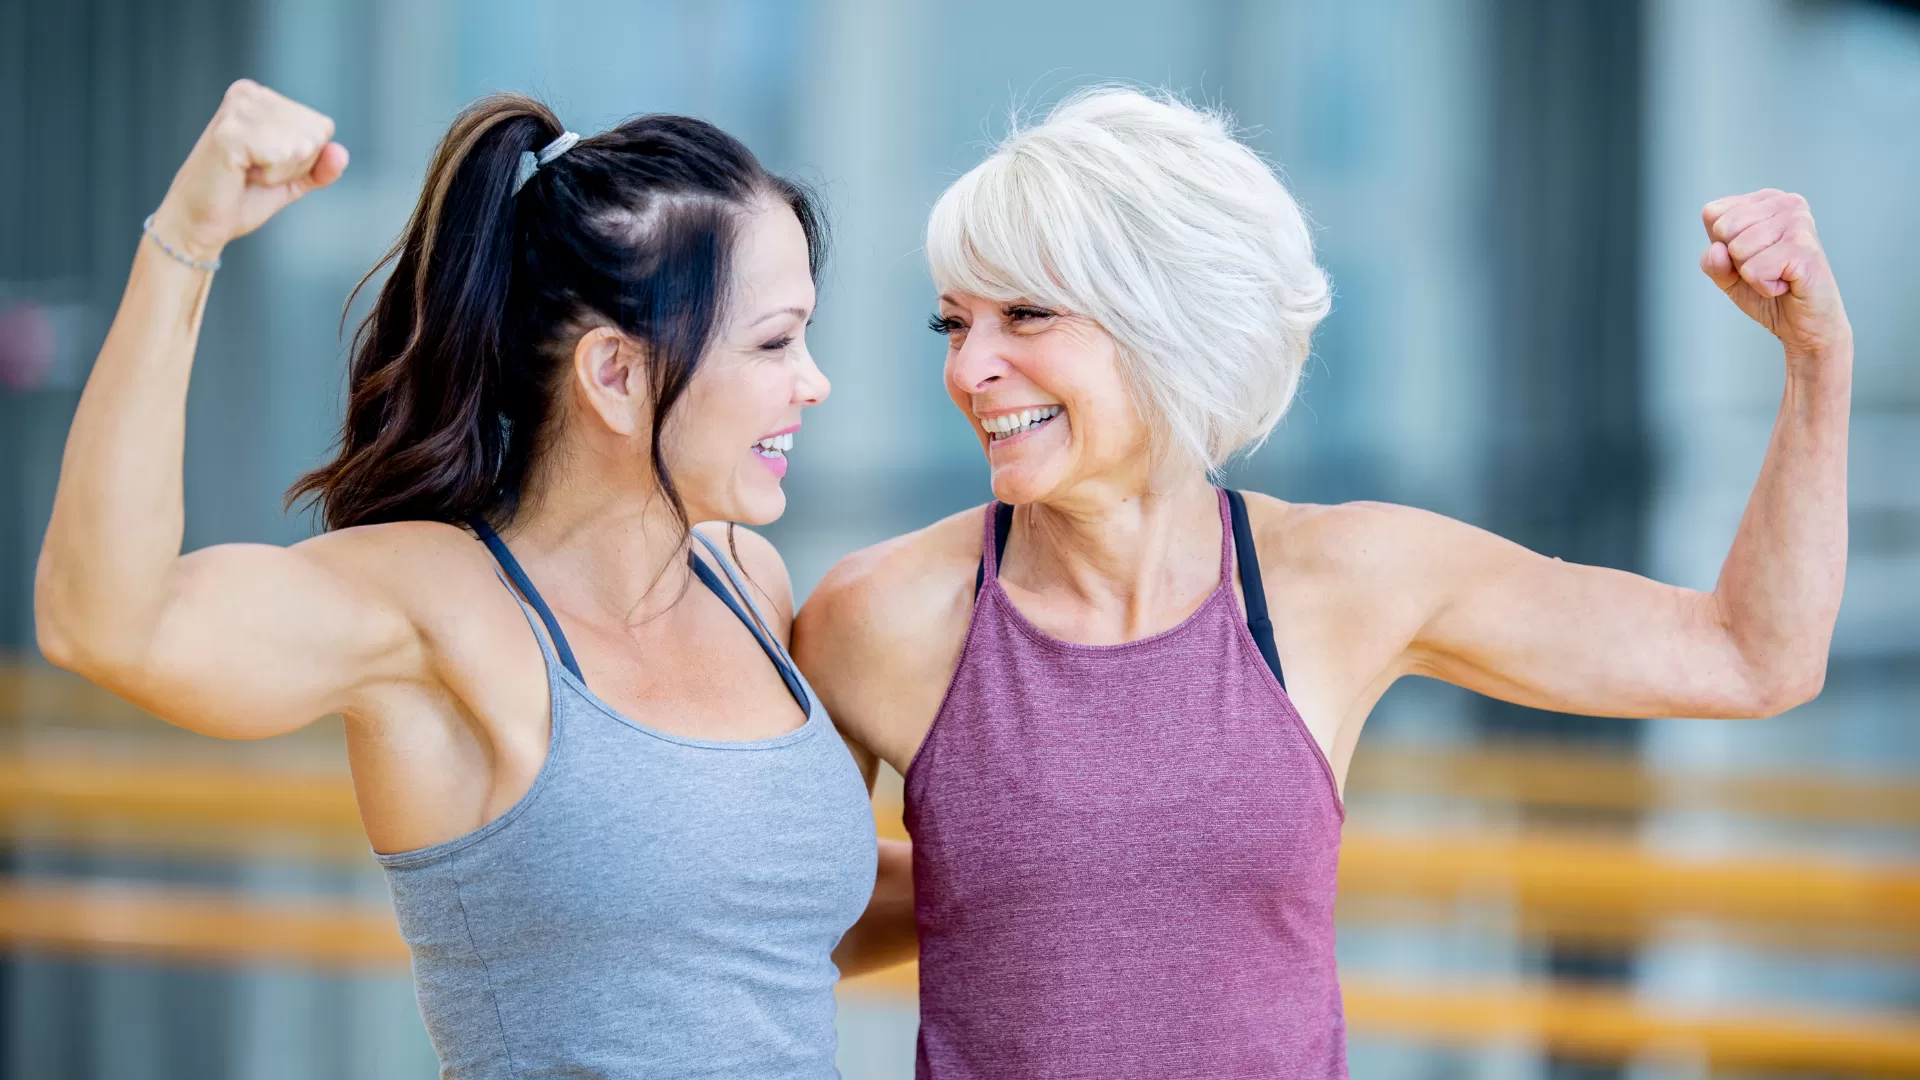 Astonishing Research Suggests Benefits of Strength Training for Anti Aging